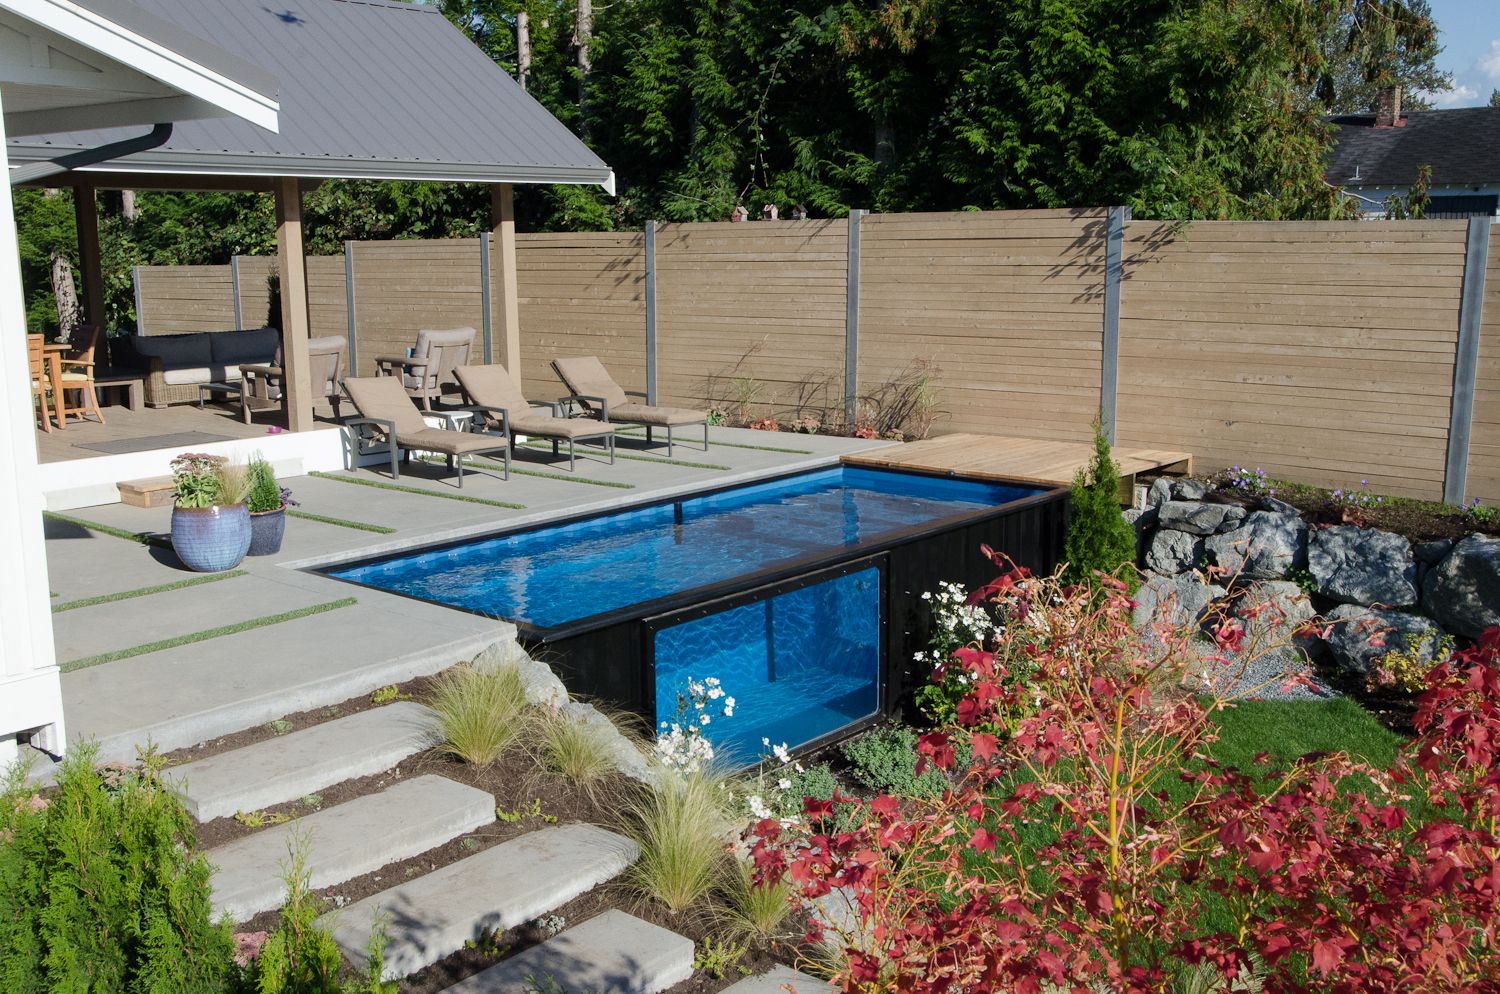 22 In-Ground Pool Designs - Best Swimming Pool Design Ideas For Your  Backyard